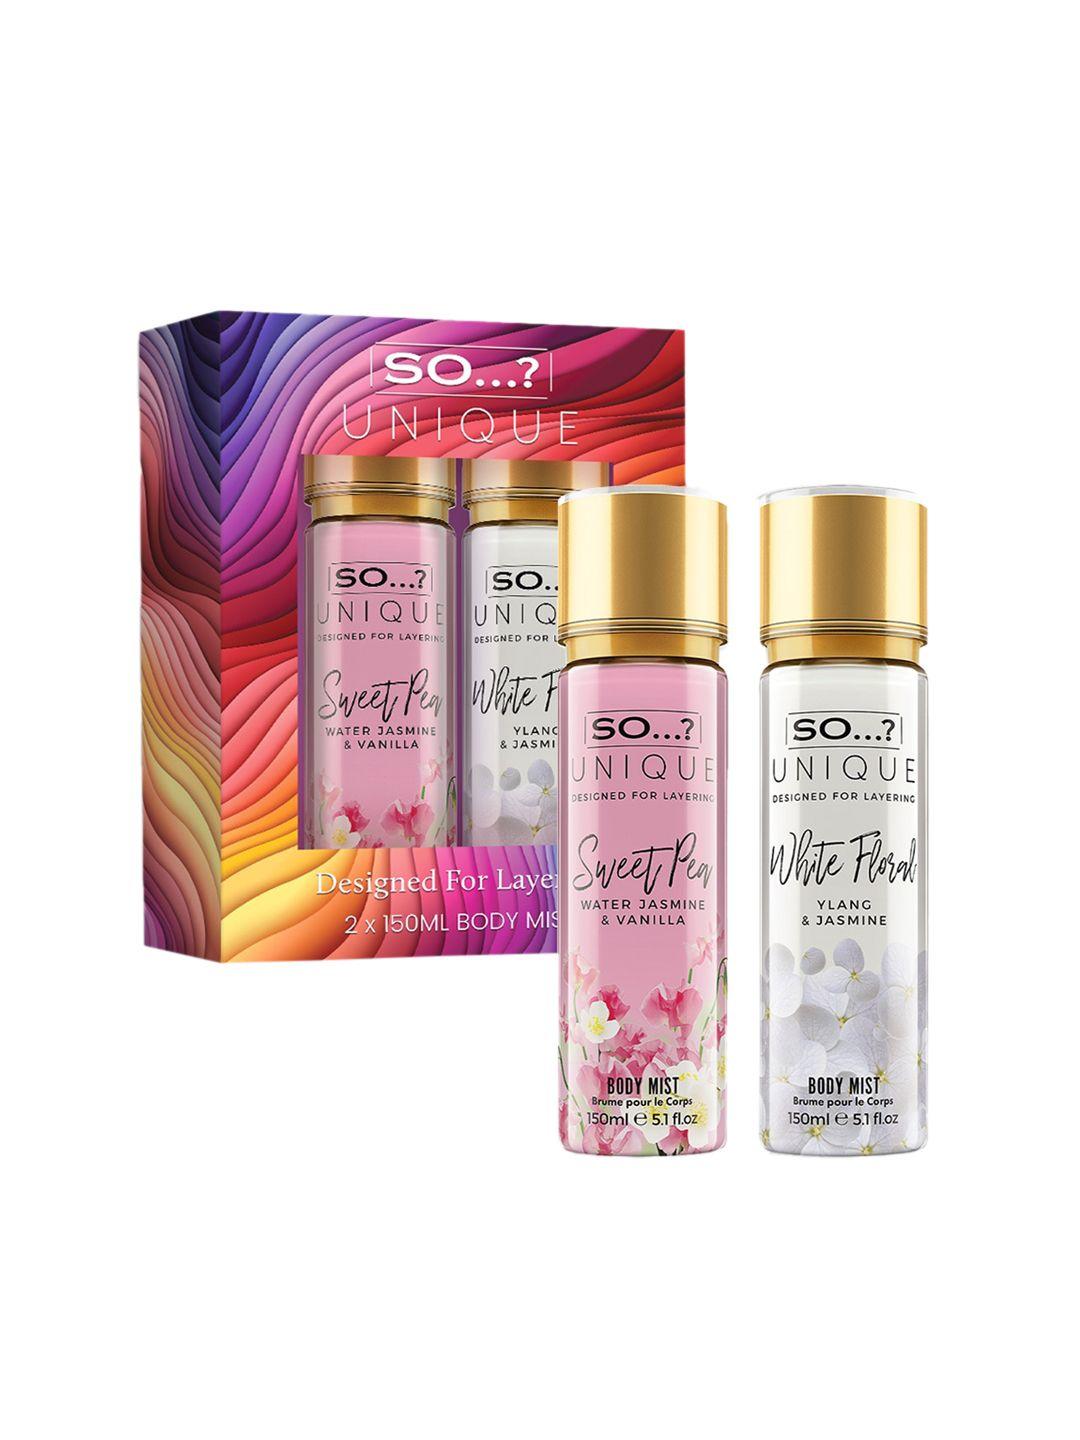 so unique set of 2 summer time body mists - sweet pea & white floral - 150ml each